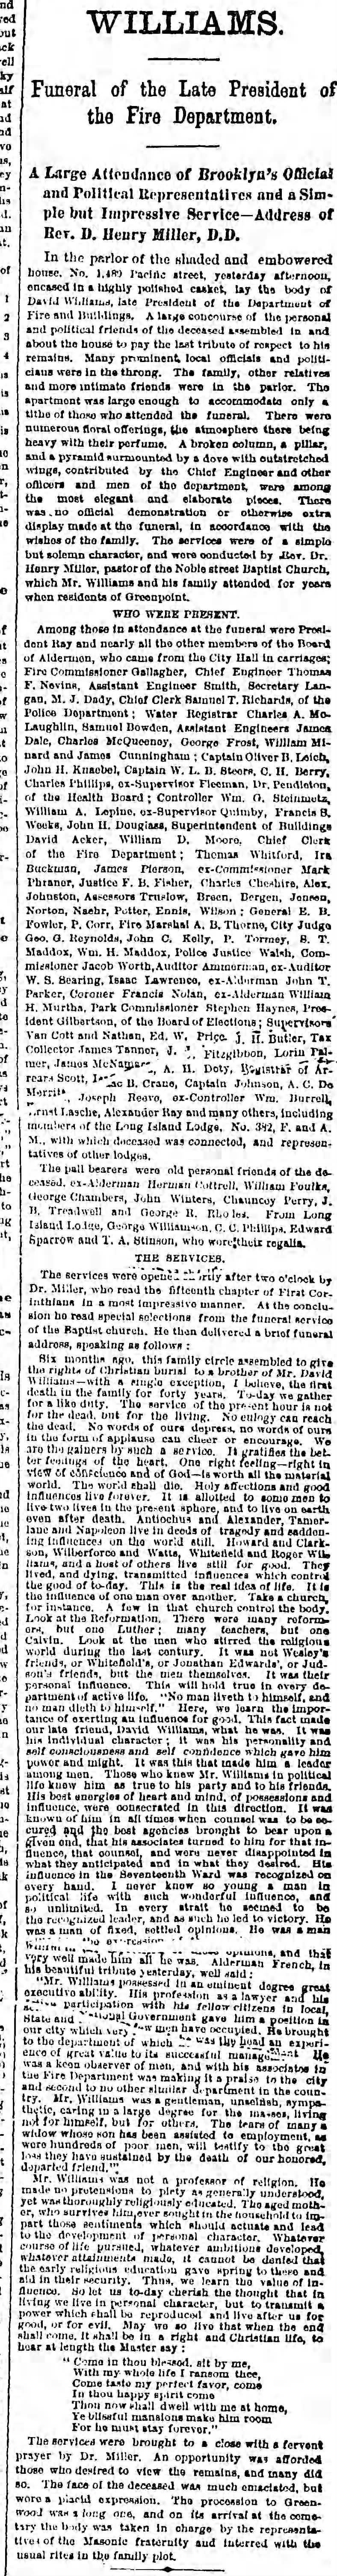 Friday, July 25, 1879 - Page 3